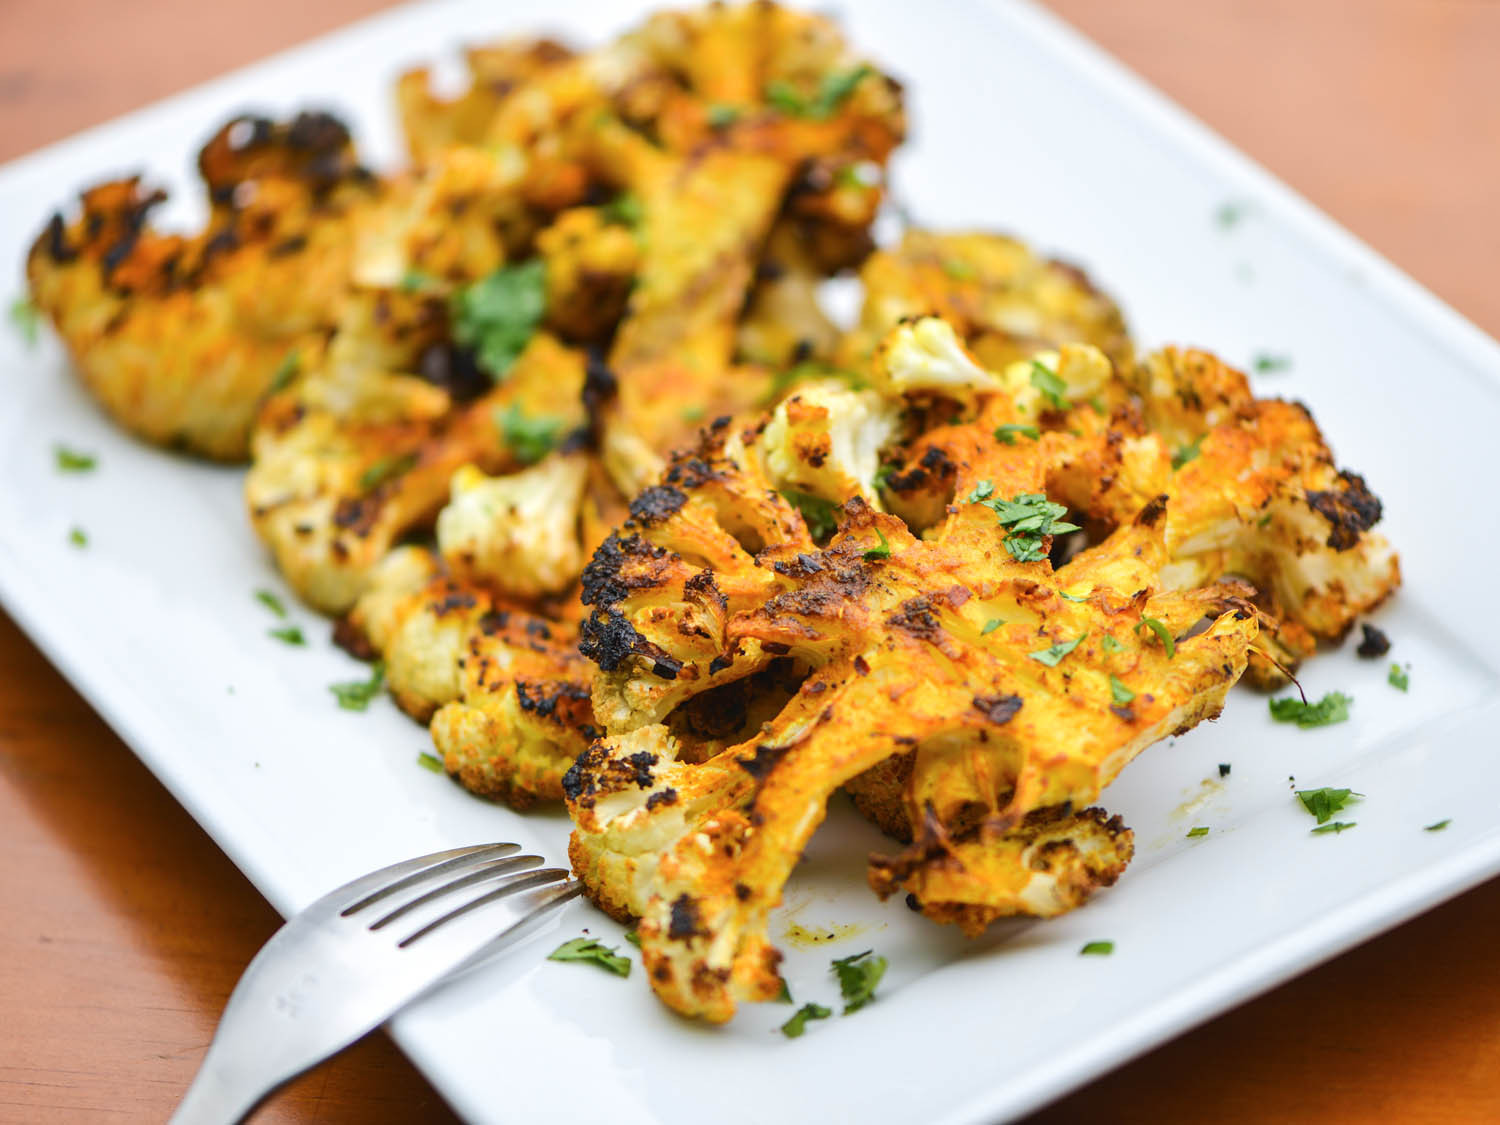 Vegetarian Grill Recipes
 17 Ve arian Recipes That Will Steal the Show at Your